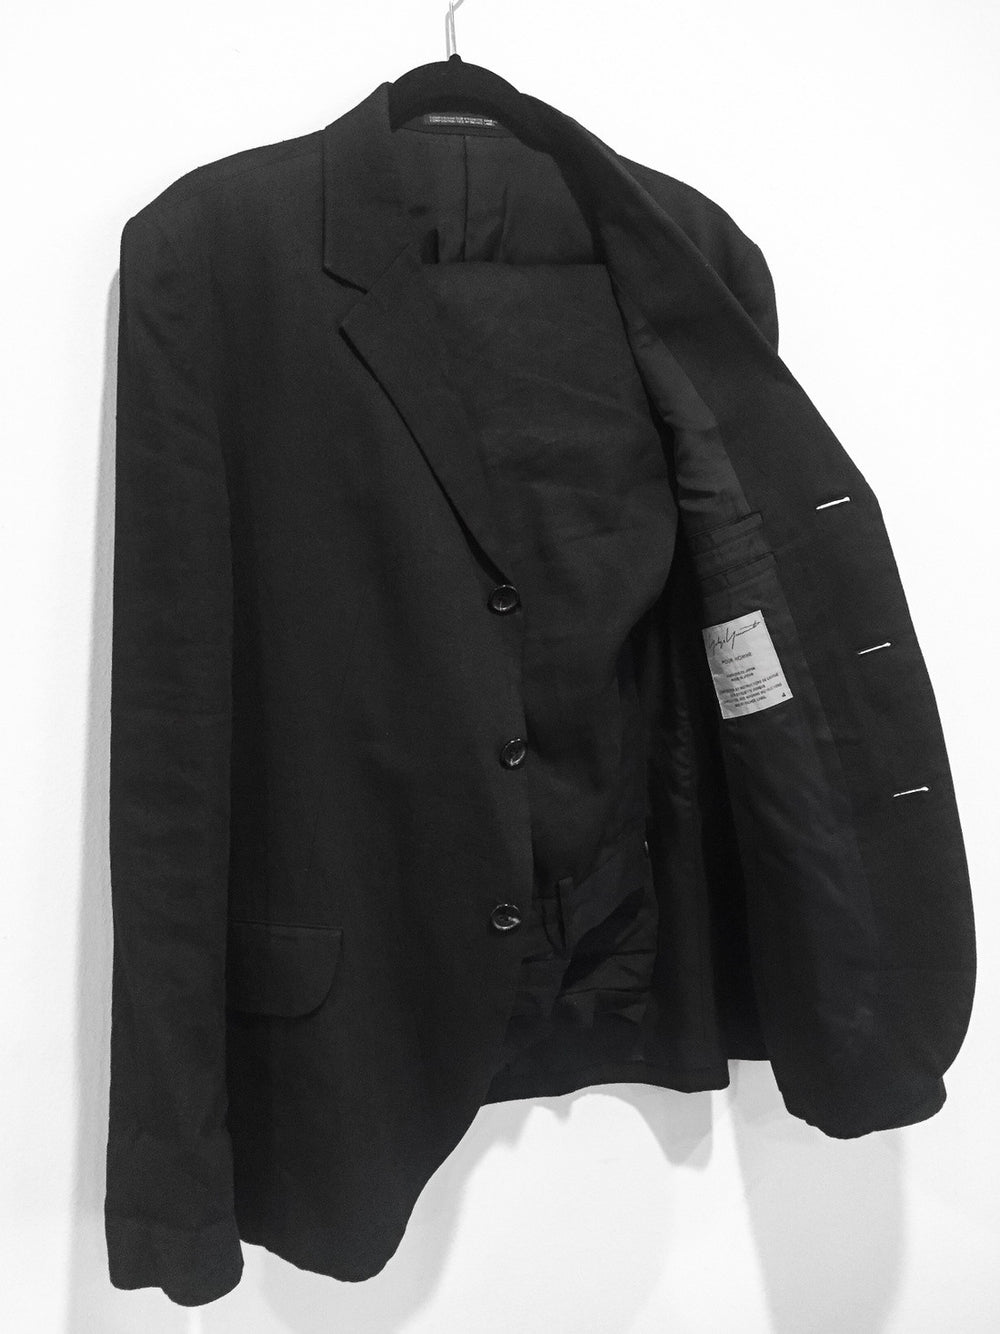 Yohji Yamamoto Pour Homme SS09 Don't Do That Suit